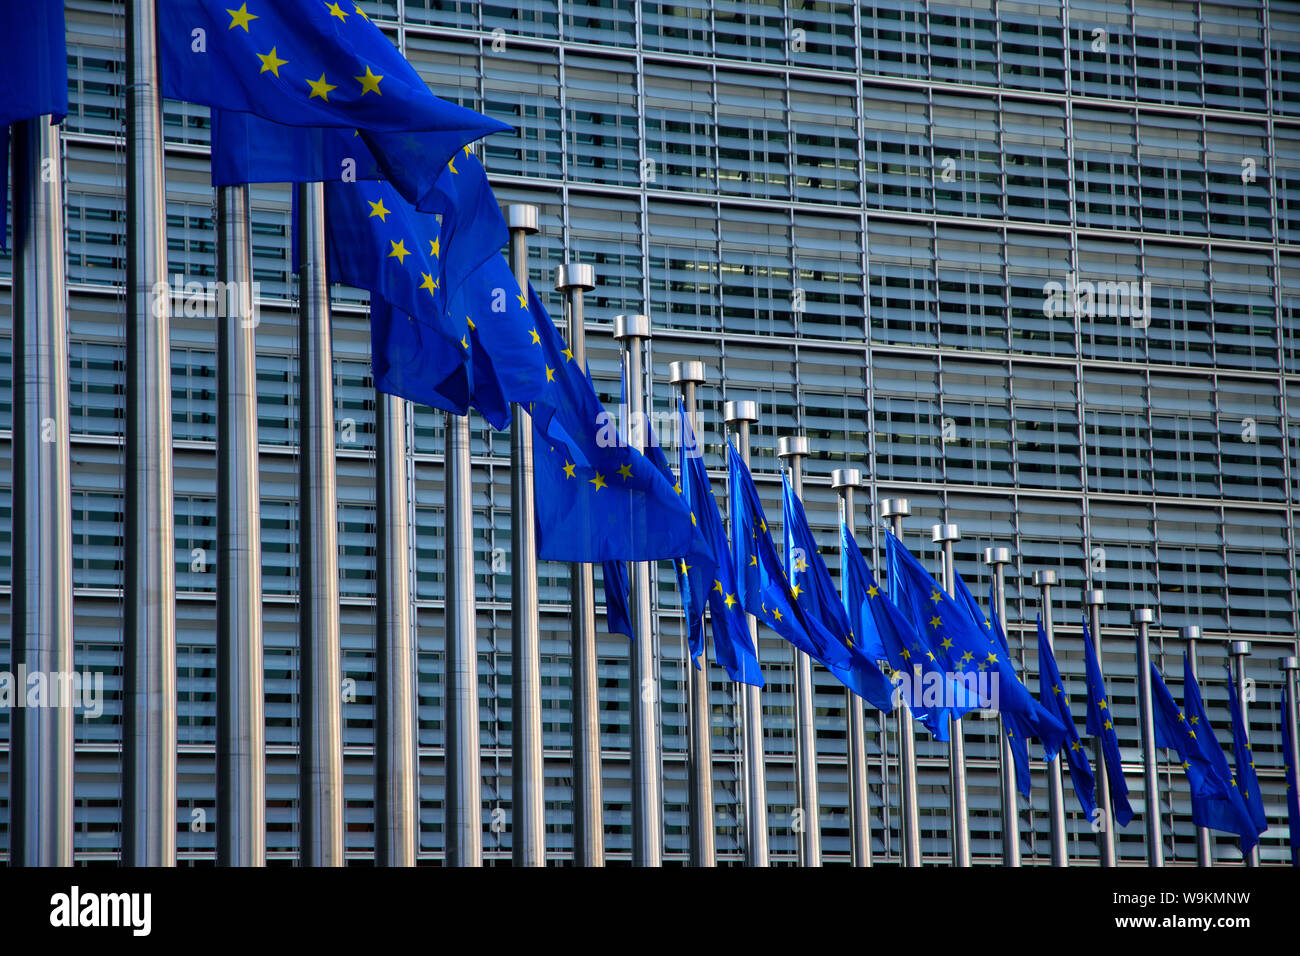 EU flags outside The Berlaymont Building, the headquarters of the European Commission in Brussels.Belgium. Stock Photo